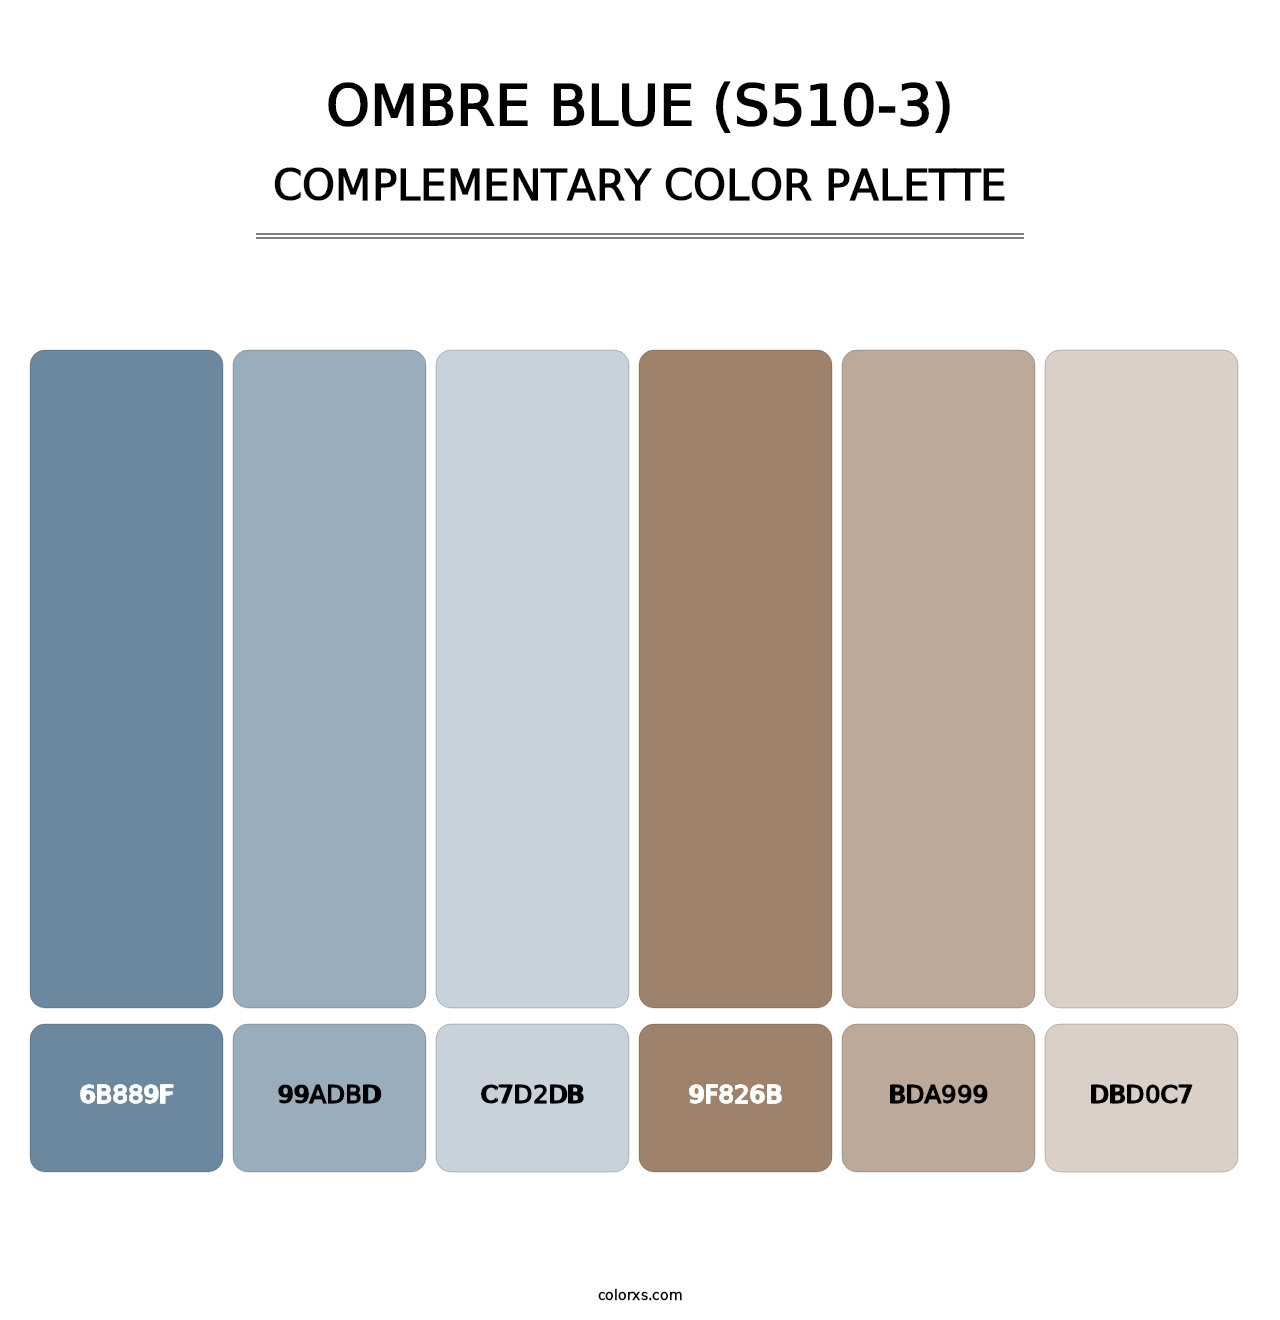 Ombre Blue (S510-3) - Complementary Color Palette